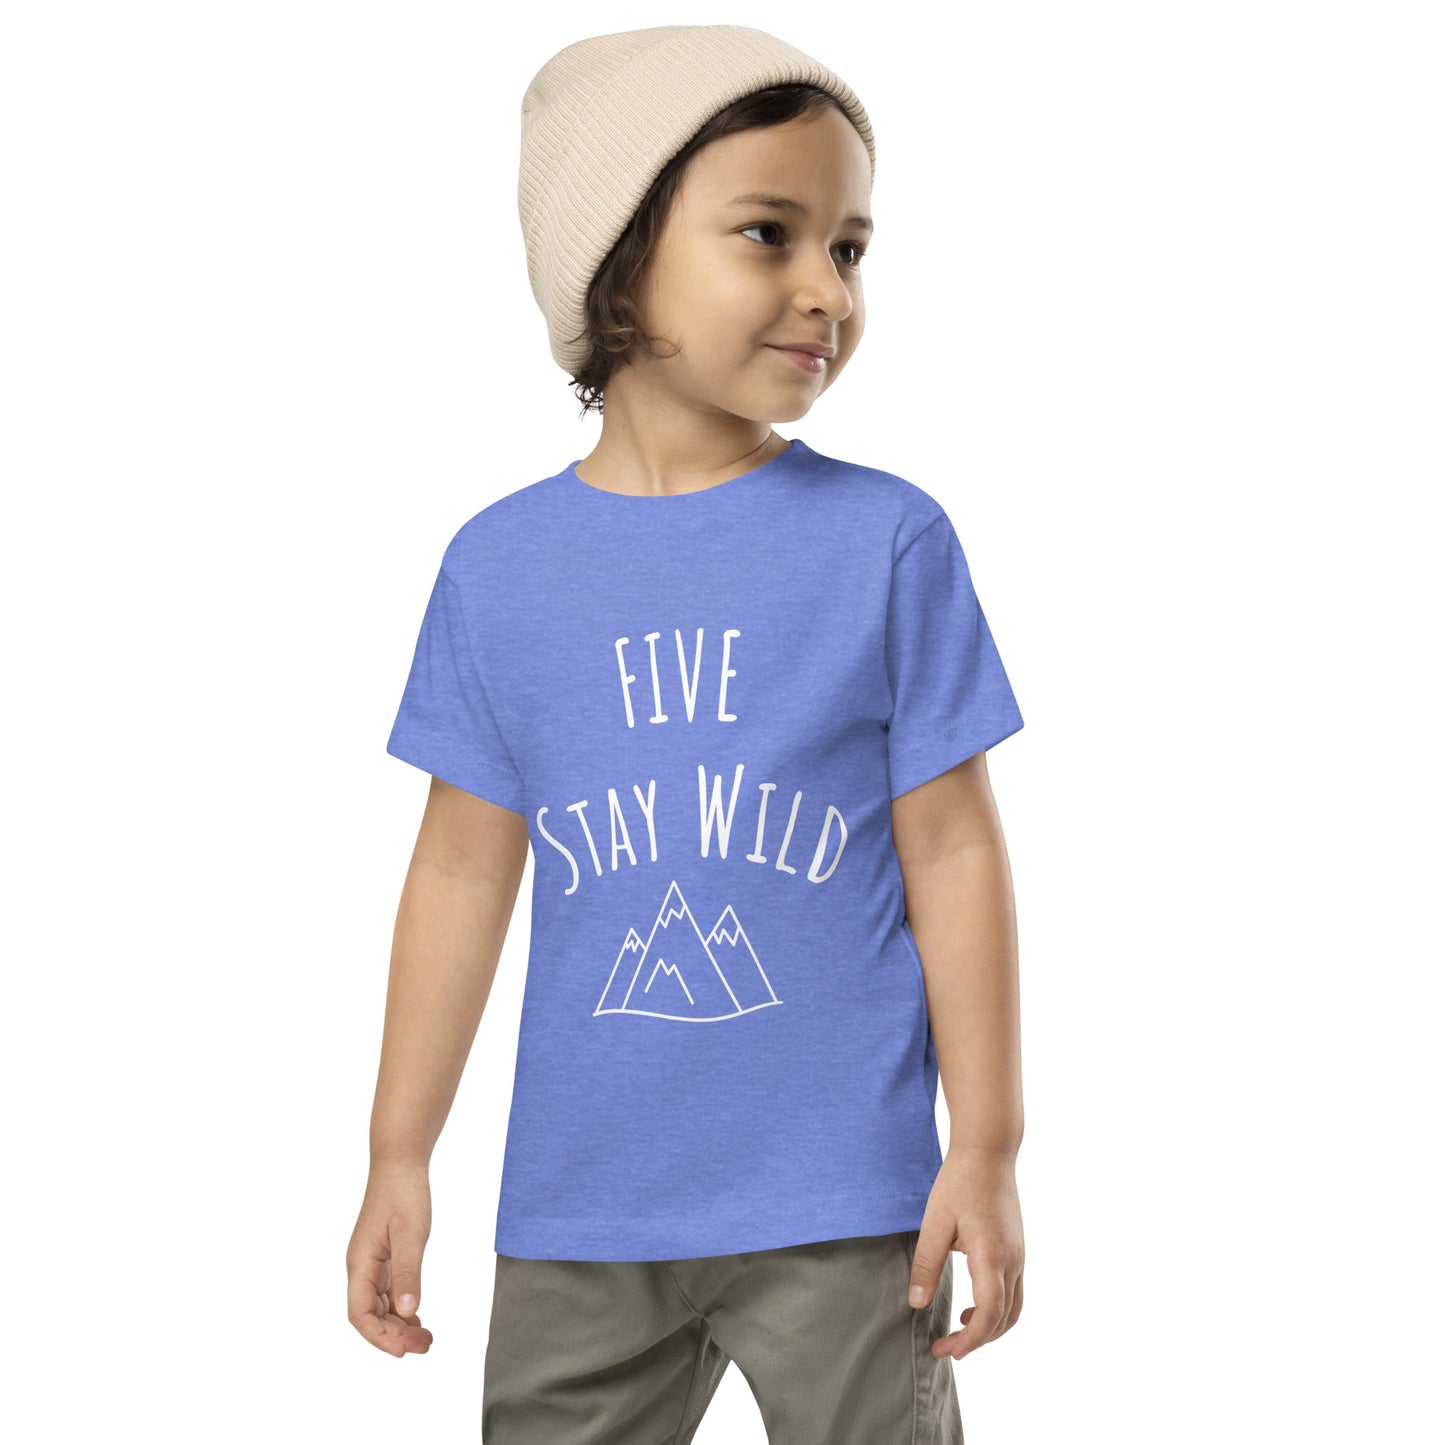 Toddler Short Sleeve Tee - Five stay wild